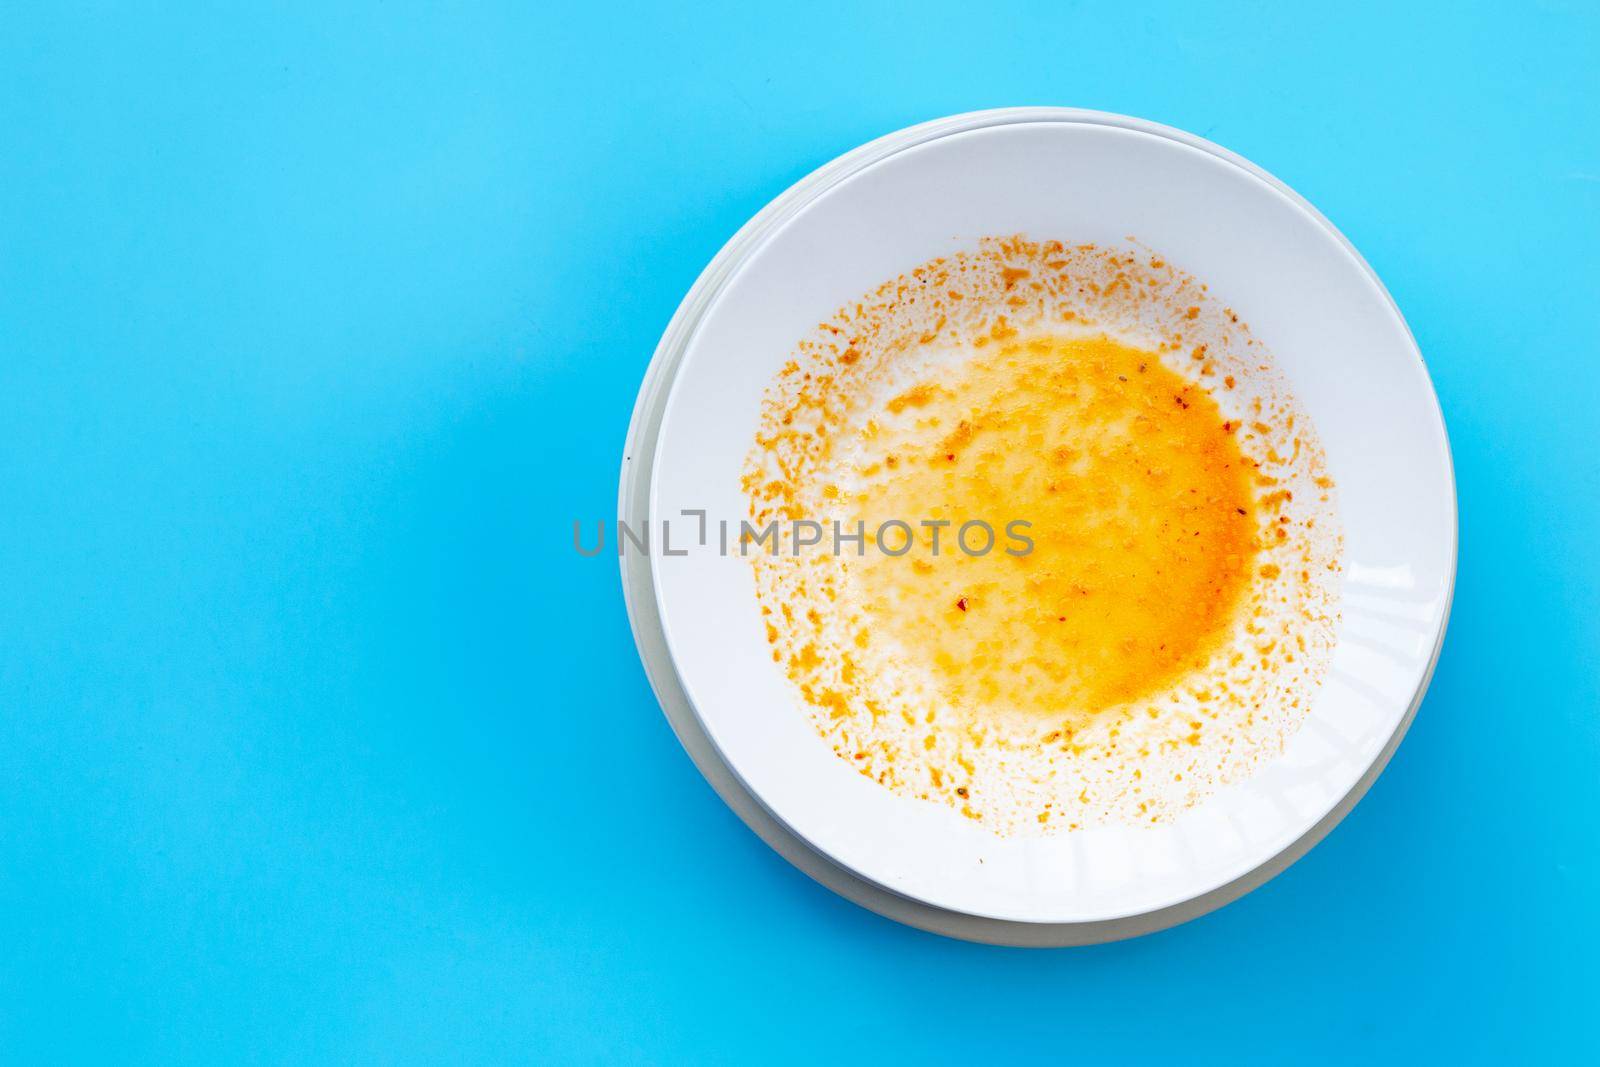 Dirty dishes on blue  background. Top view by Bowonpat